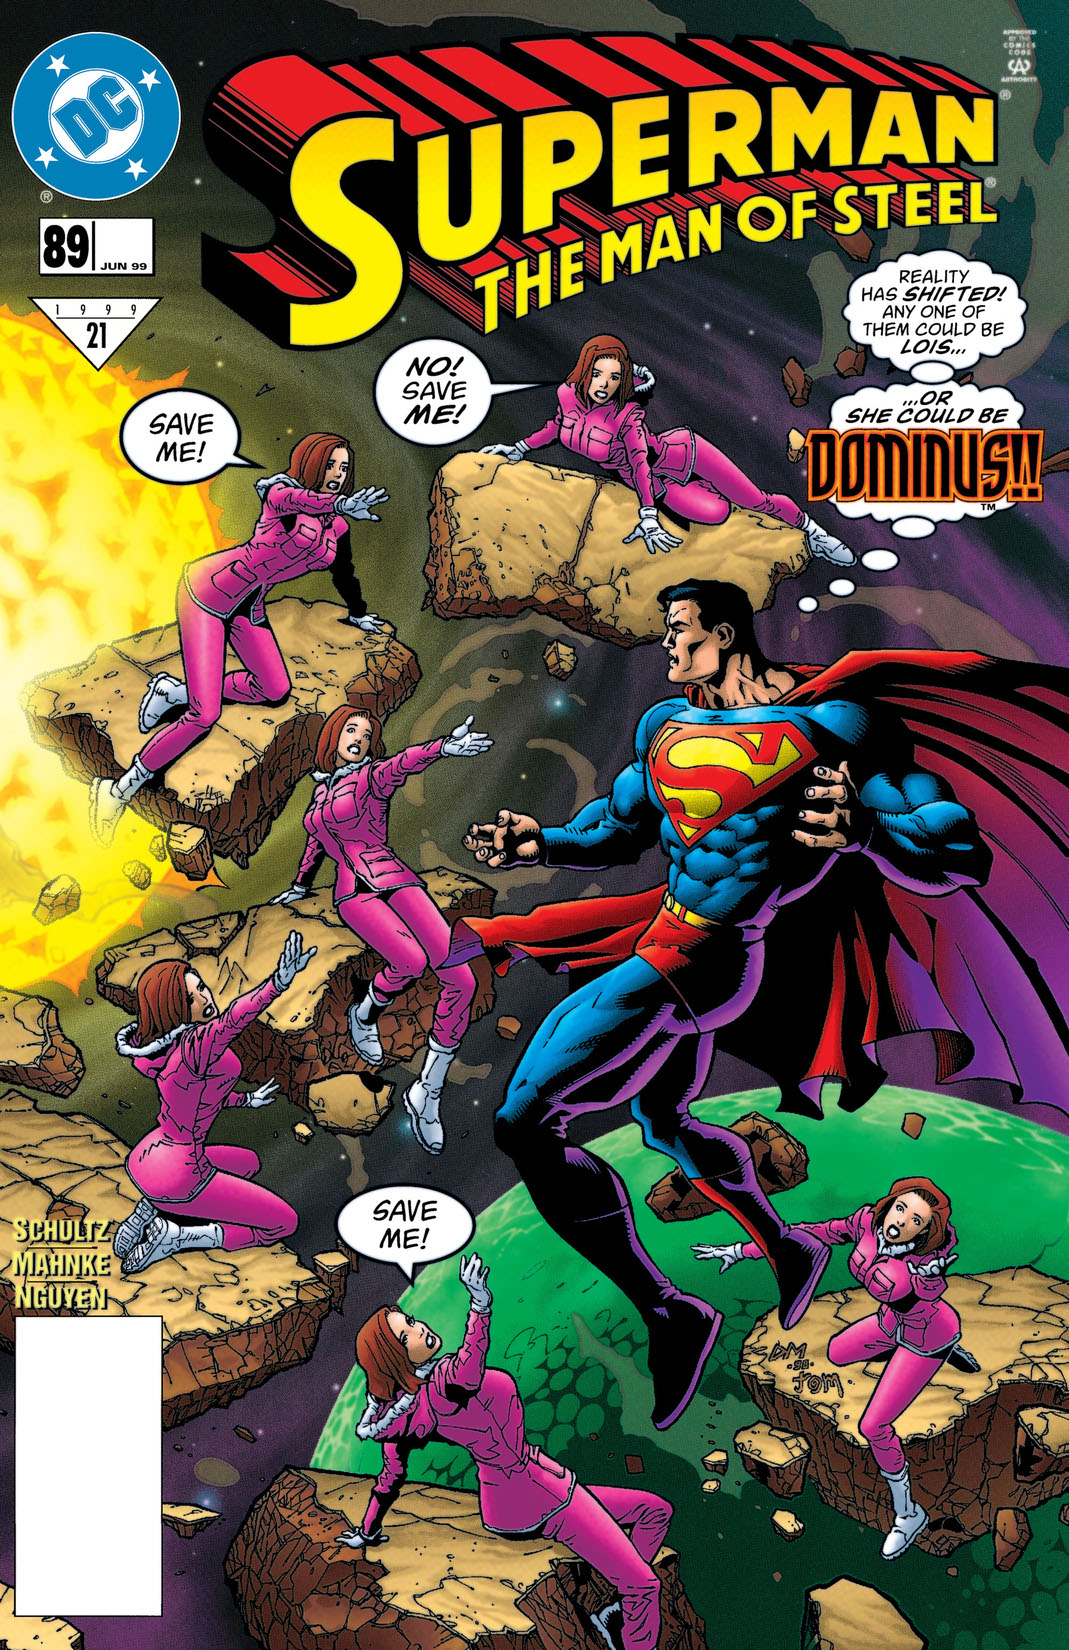 Superman: The Man of Steel #89 preview images